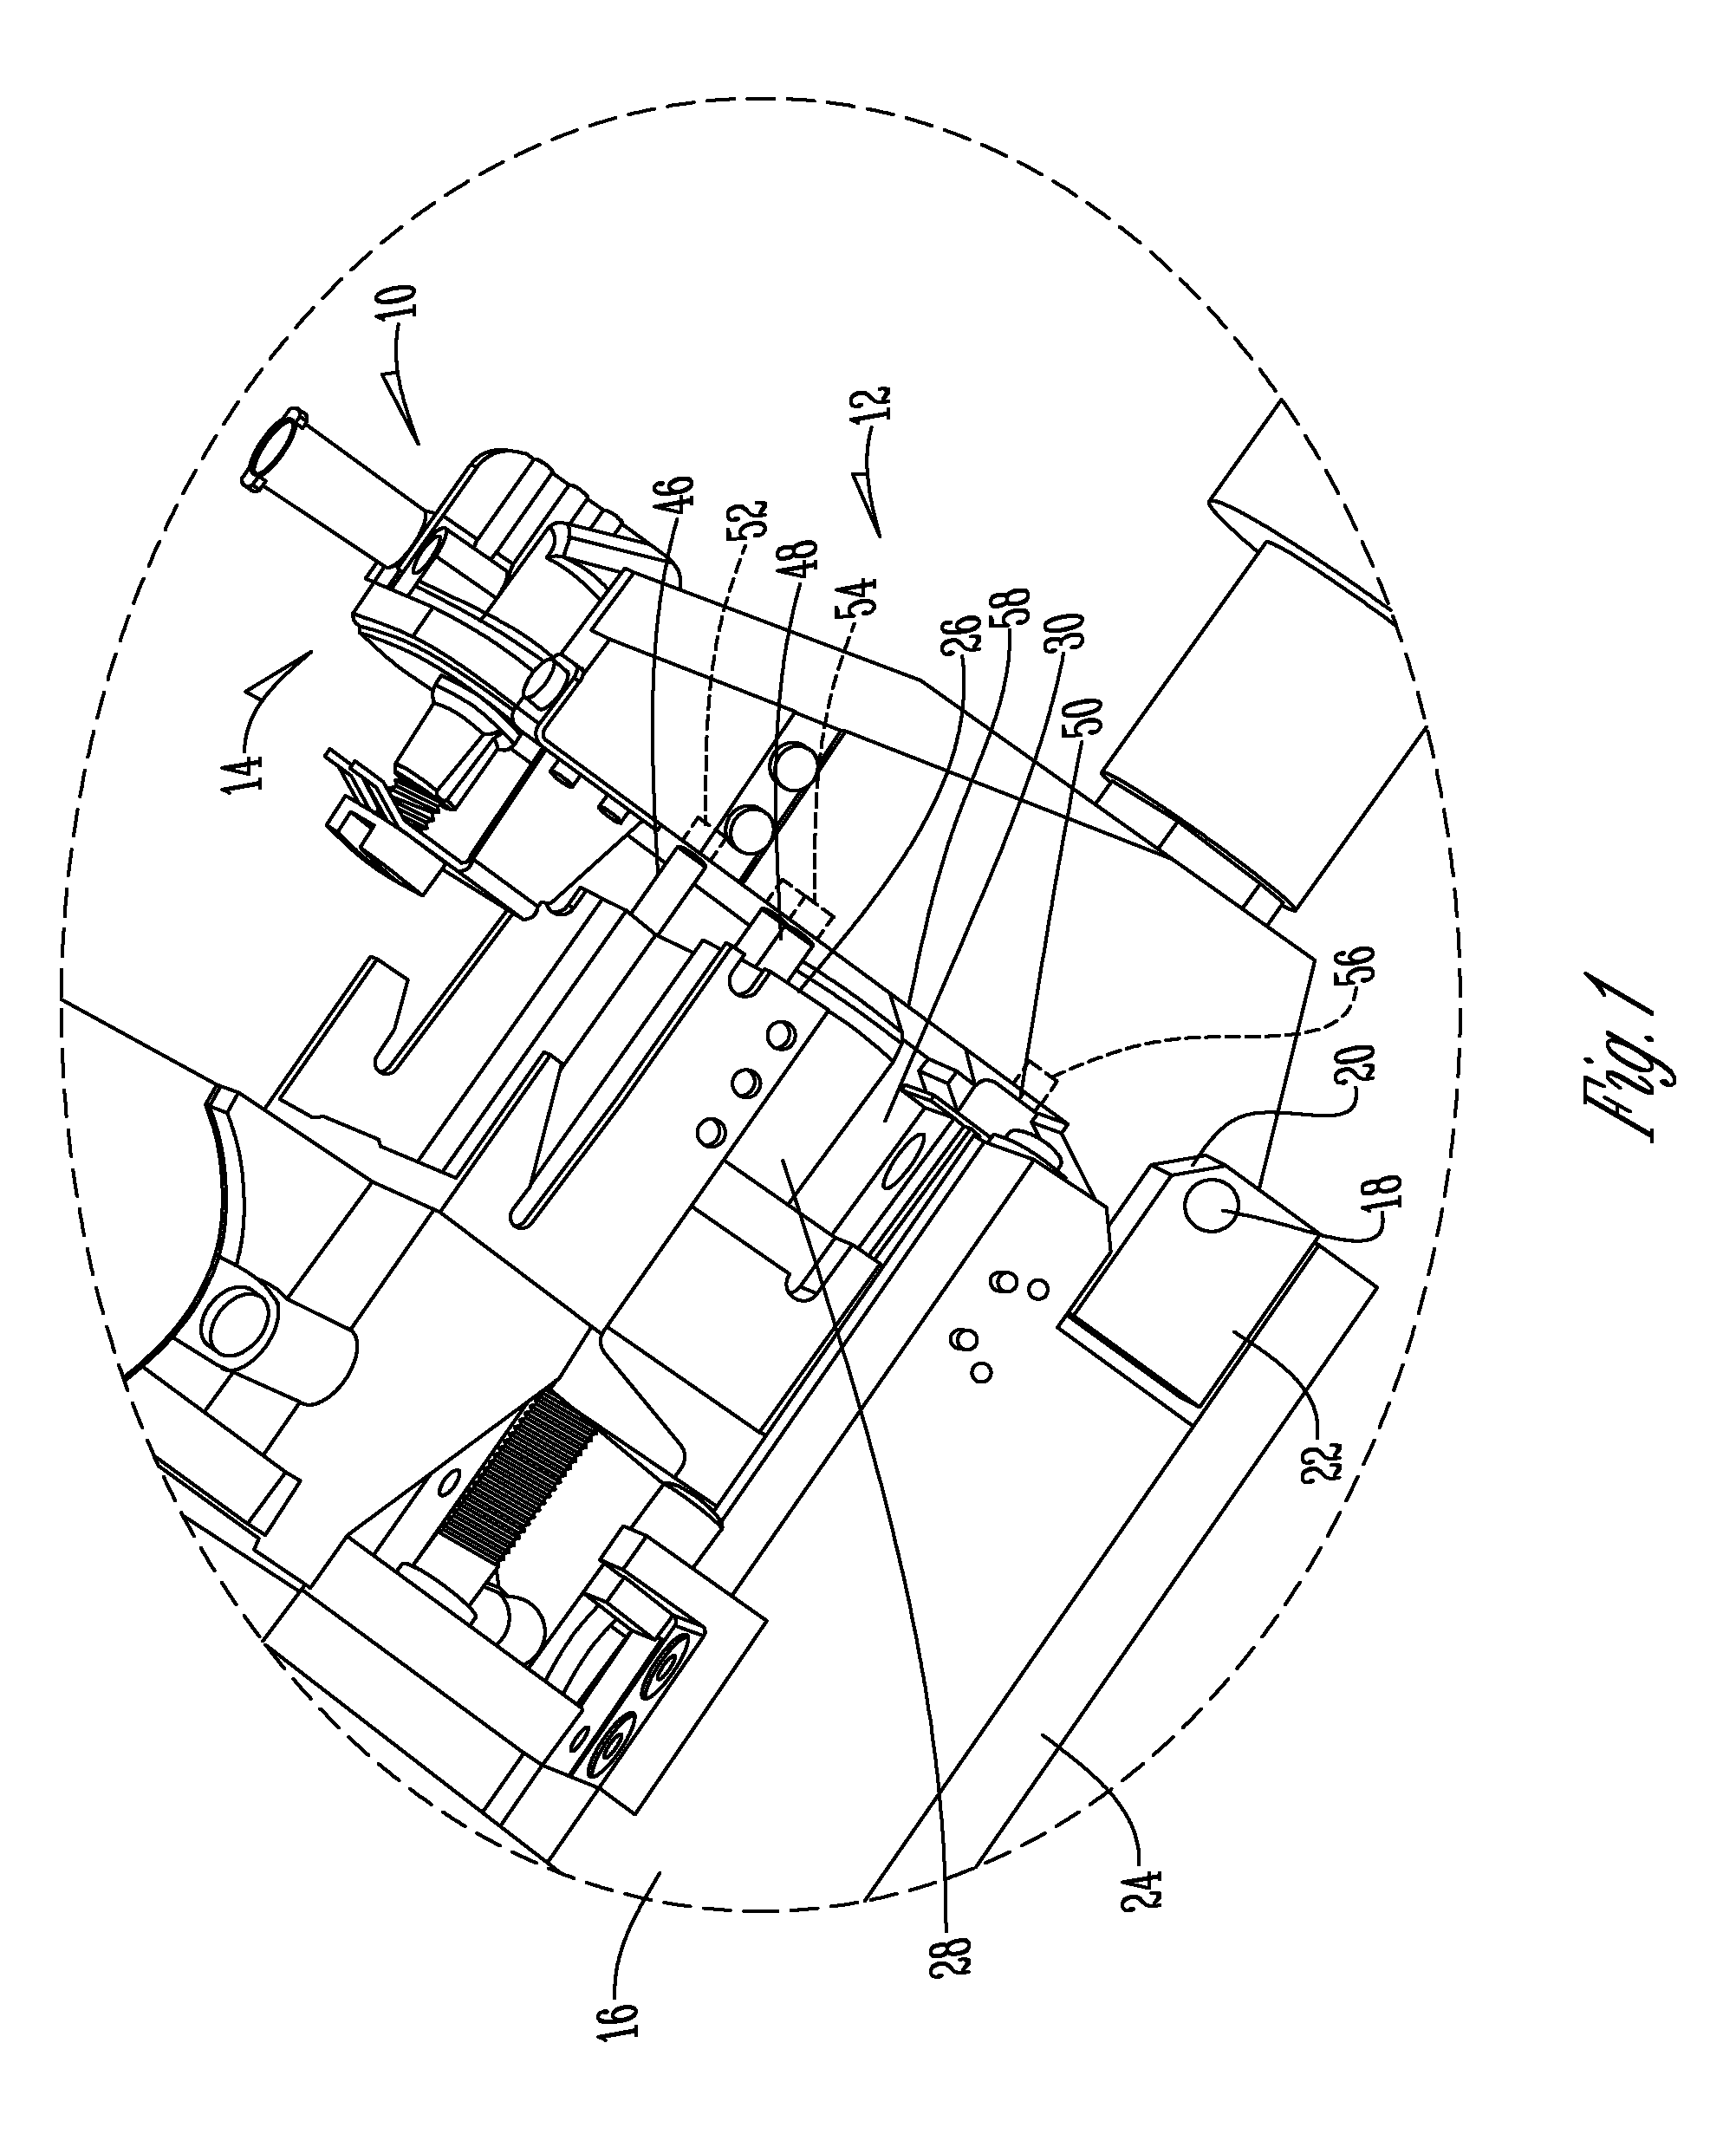 Door mount stabilization system for an infusion pump